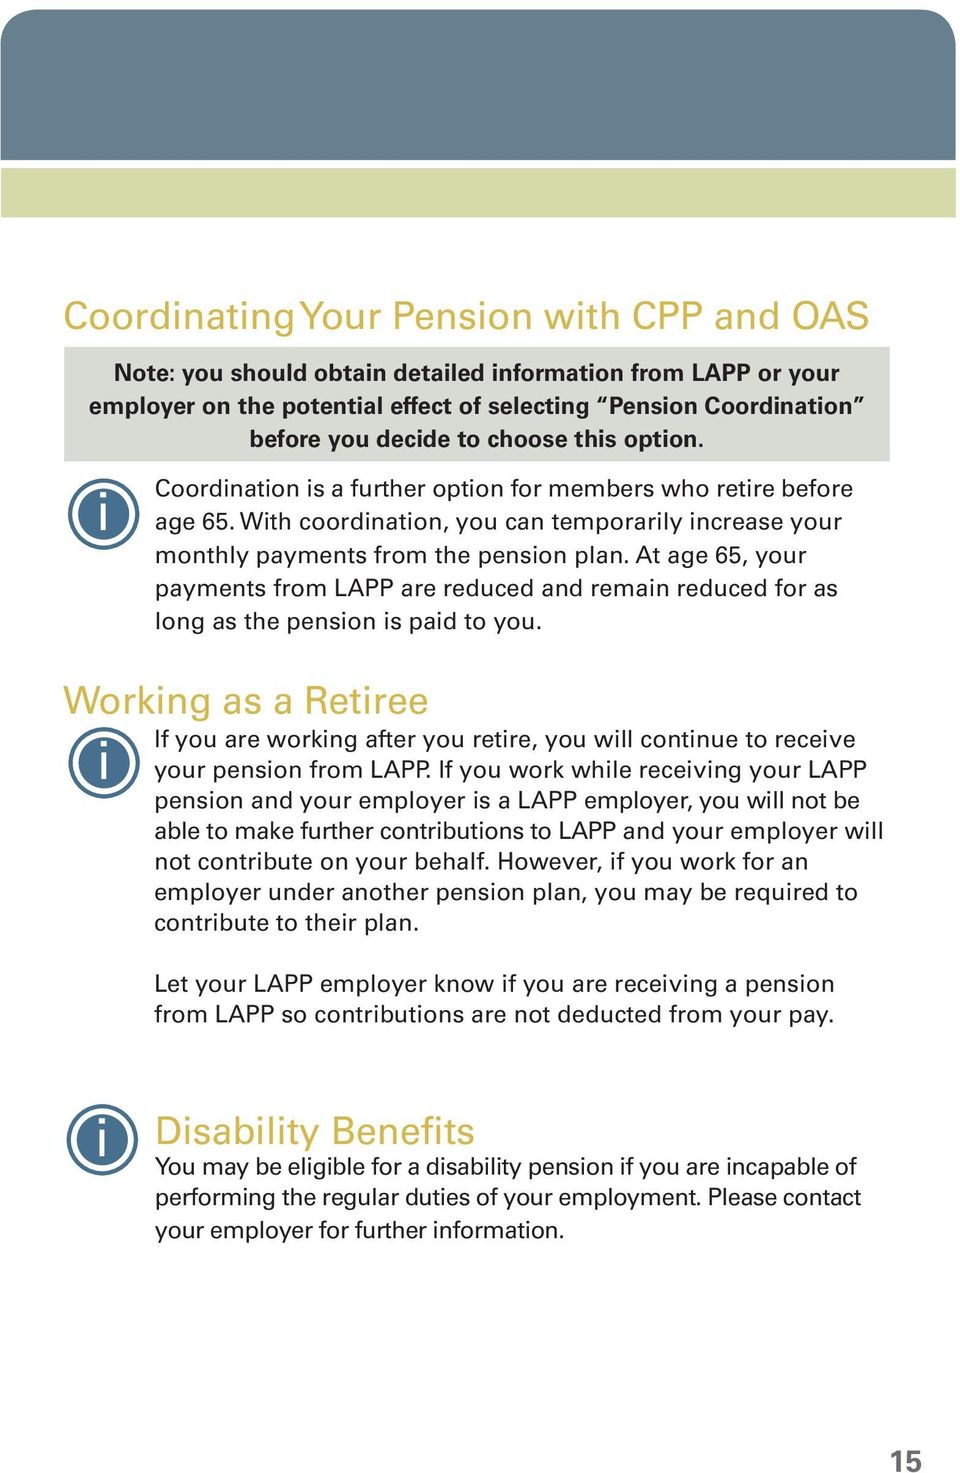 At age 65, your payments from LAPP are reduced and remain reduced for as long as the pension is paid to you.